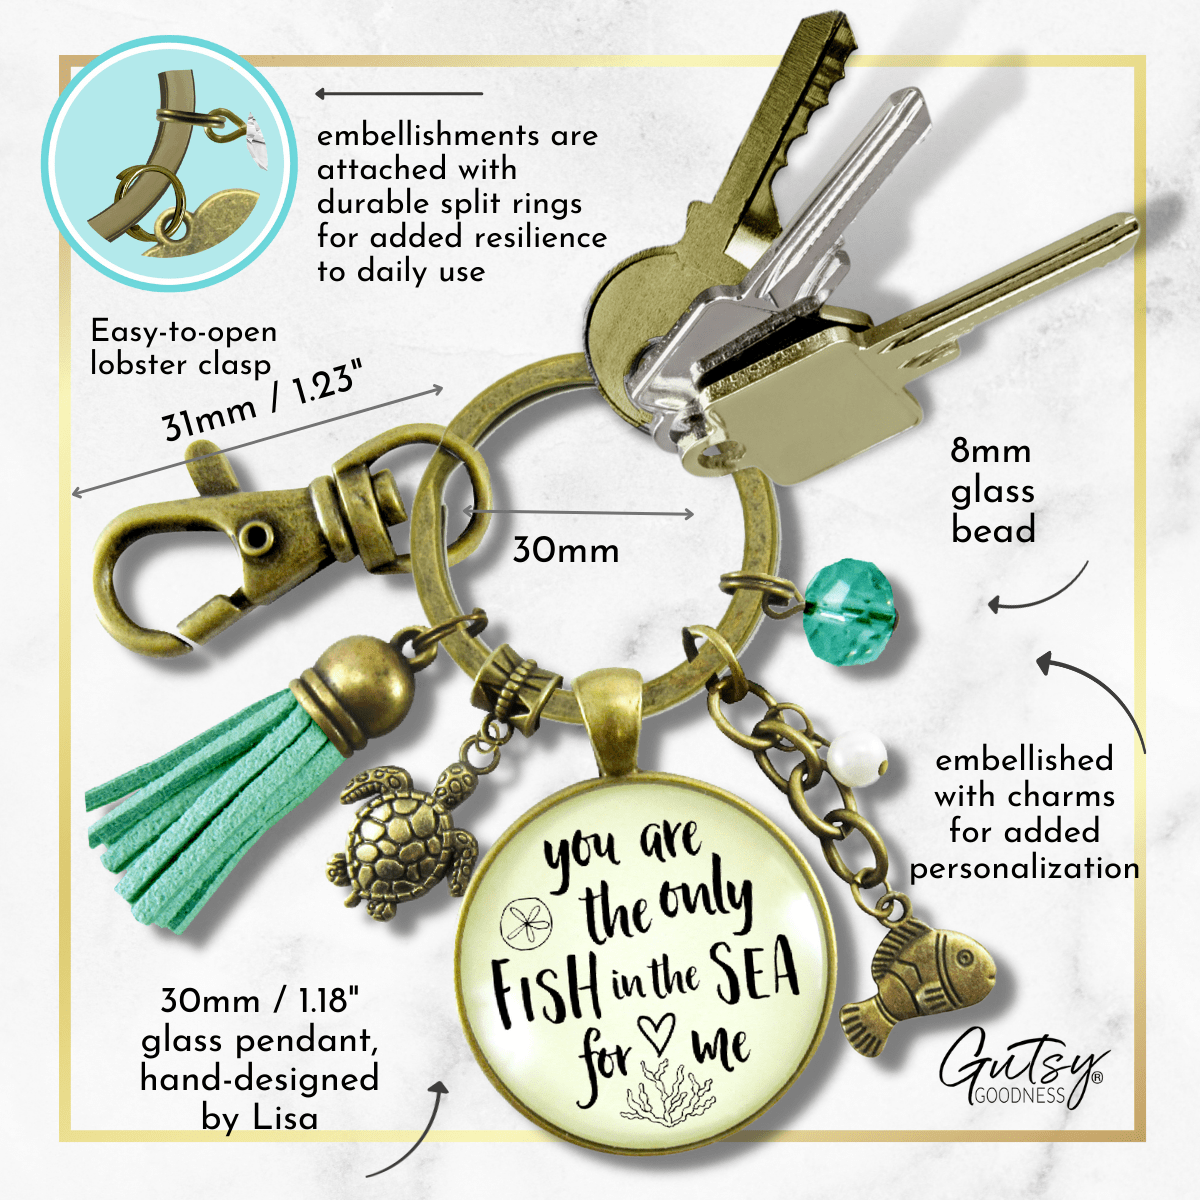 Fishing Keychains Couples Set You Are Only Fish In Sea Romantic Gift Match His Hers - Gutsy Goodness